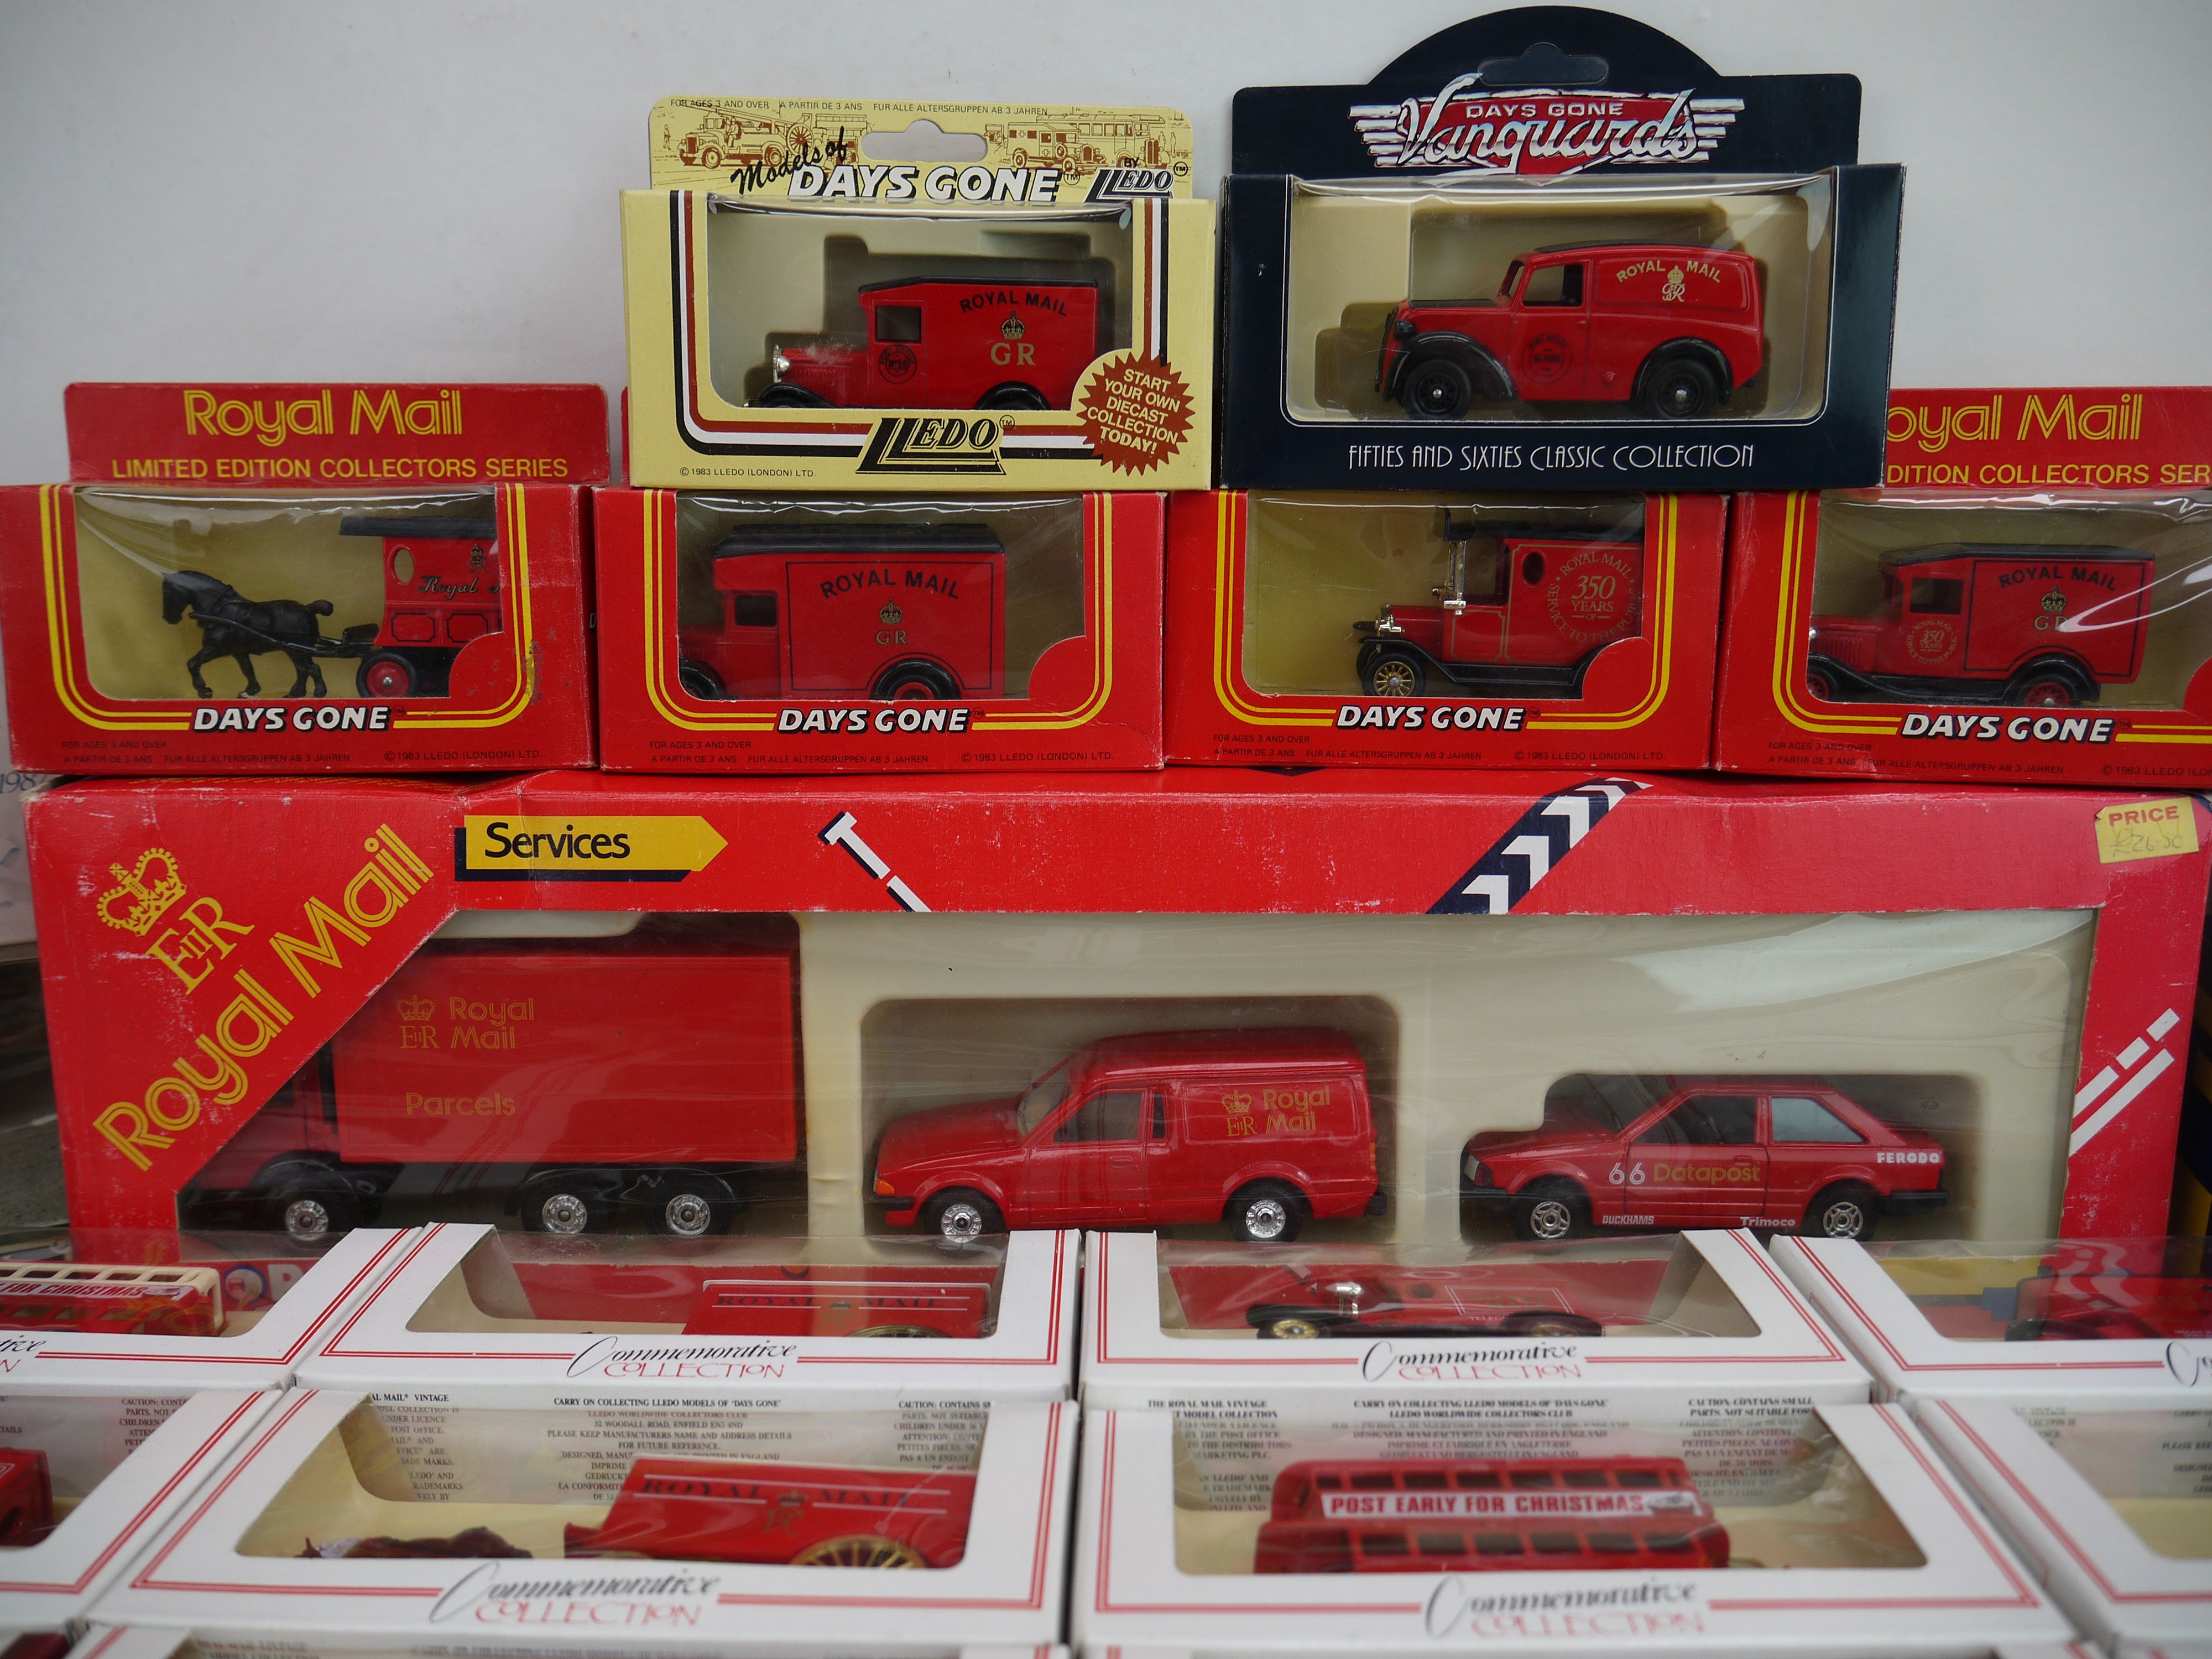 Group of 40+ boxed diecast models, all postal service related, to include Lledo, Corgi etc - Image 10 of 10